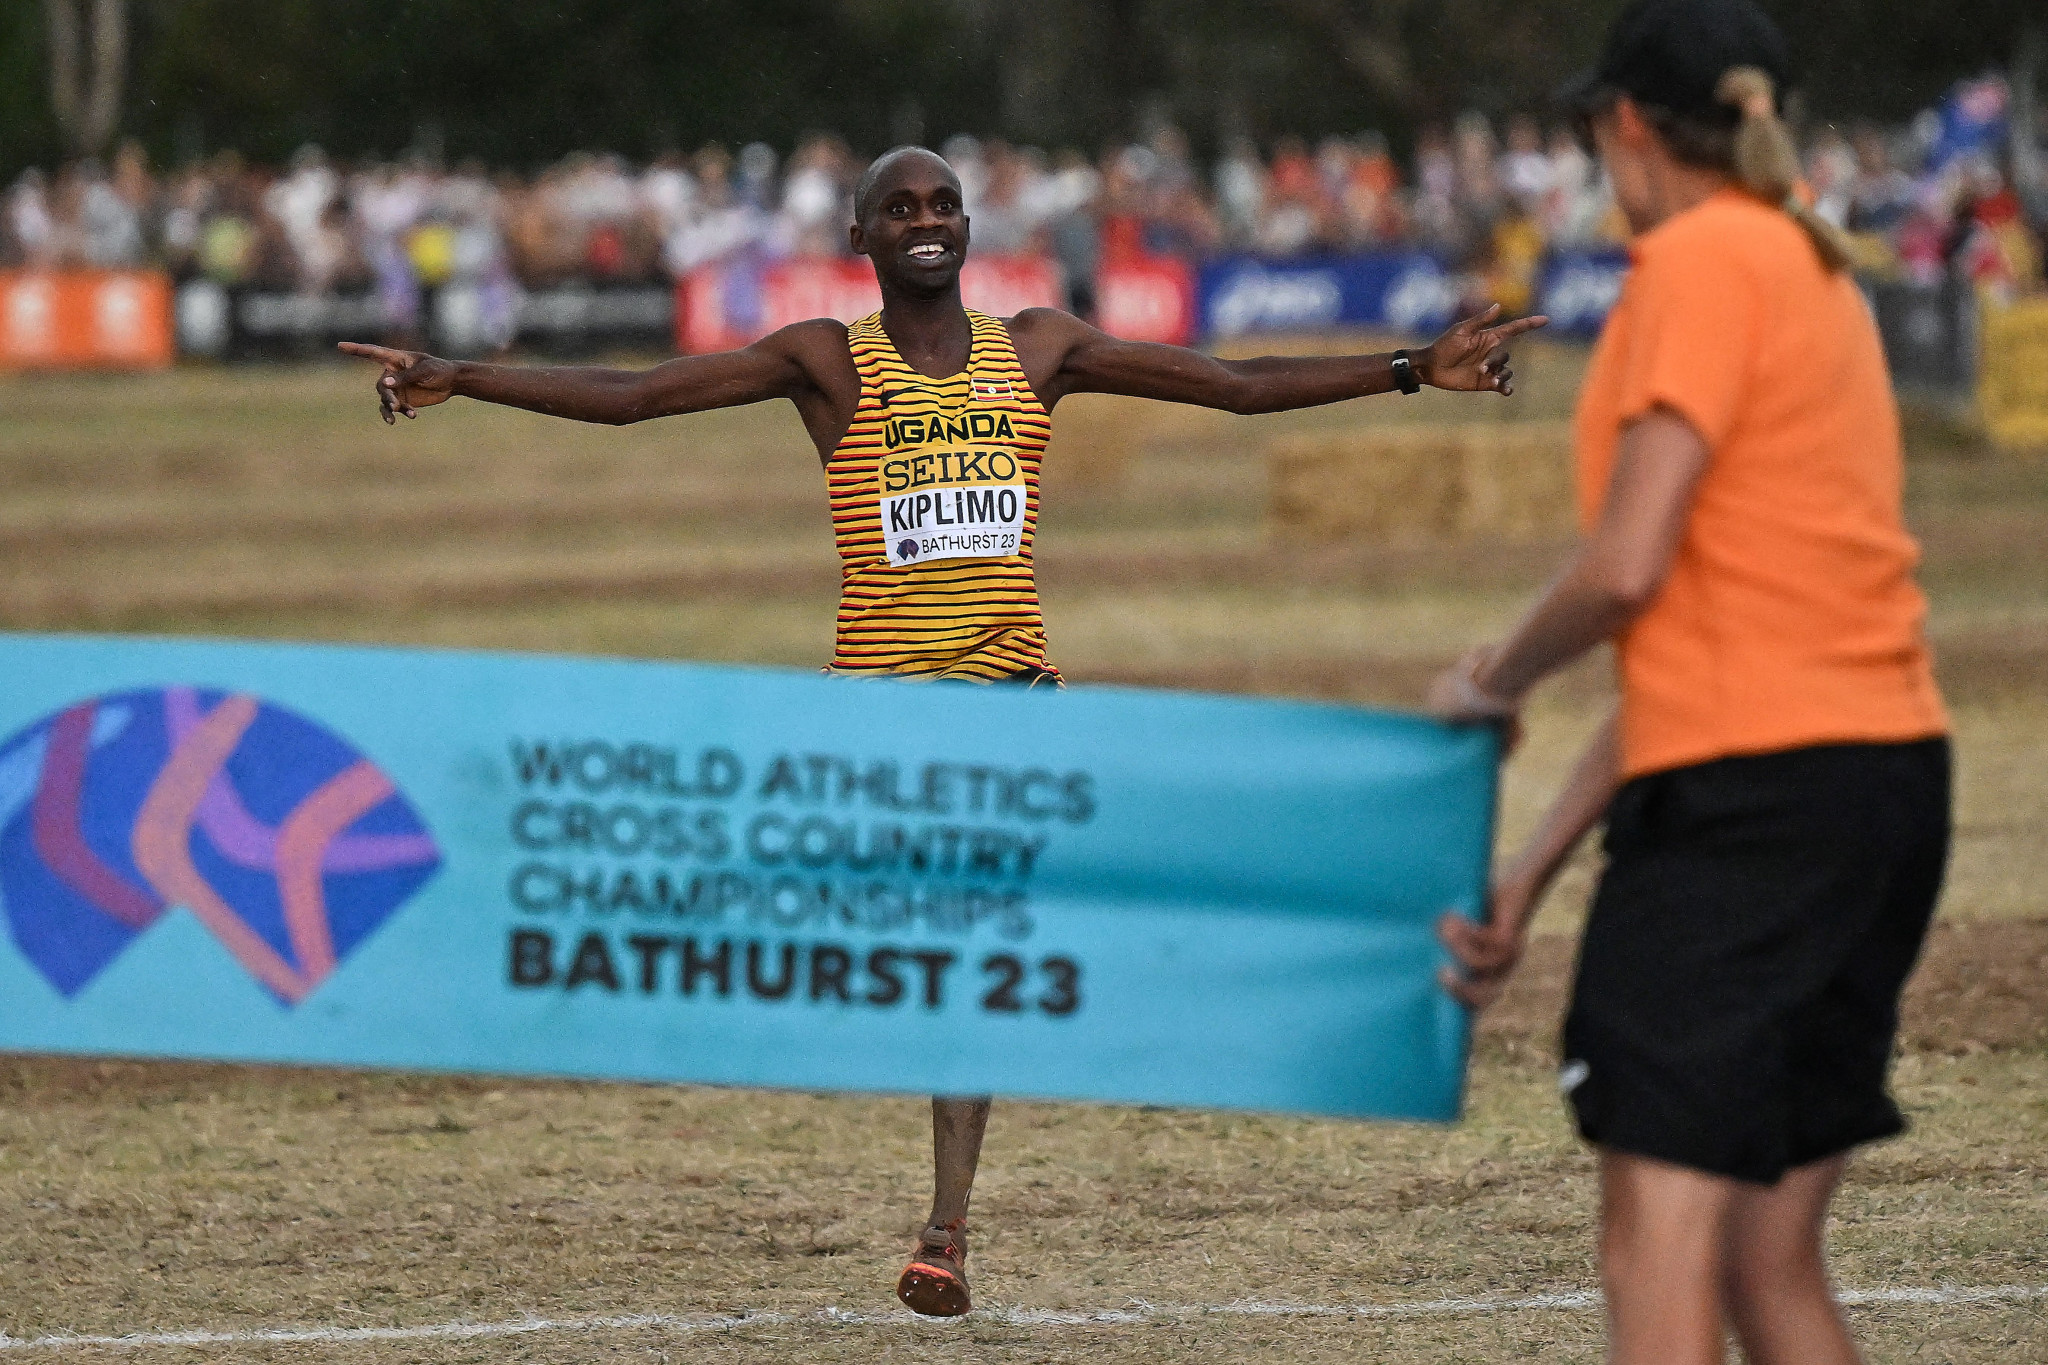 Uganda's Jakob Kiplimo sprung a surprise in the men's race when he defeated team-mate Joshua Cheptegei, the world record holder for the 5,000m and 10,000m, in Bathurst ©Getty Images